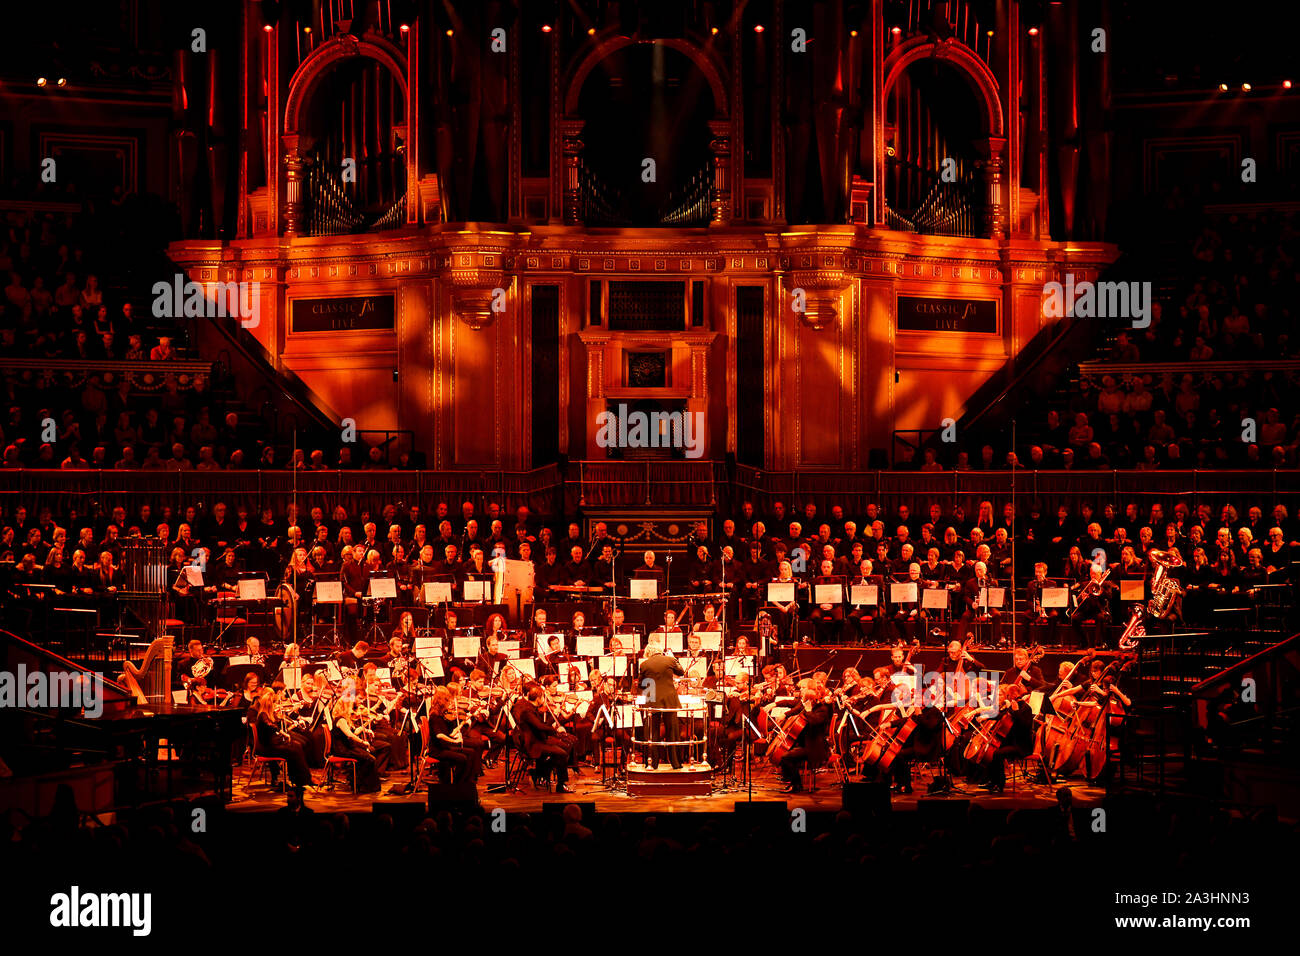 Stephen Barlow conducts the Bournemouth Symphony Orchestra on stage at Classic FM Live at London's Royal Albert Hall. Stock Photo